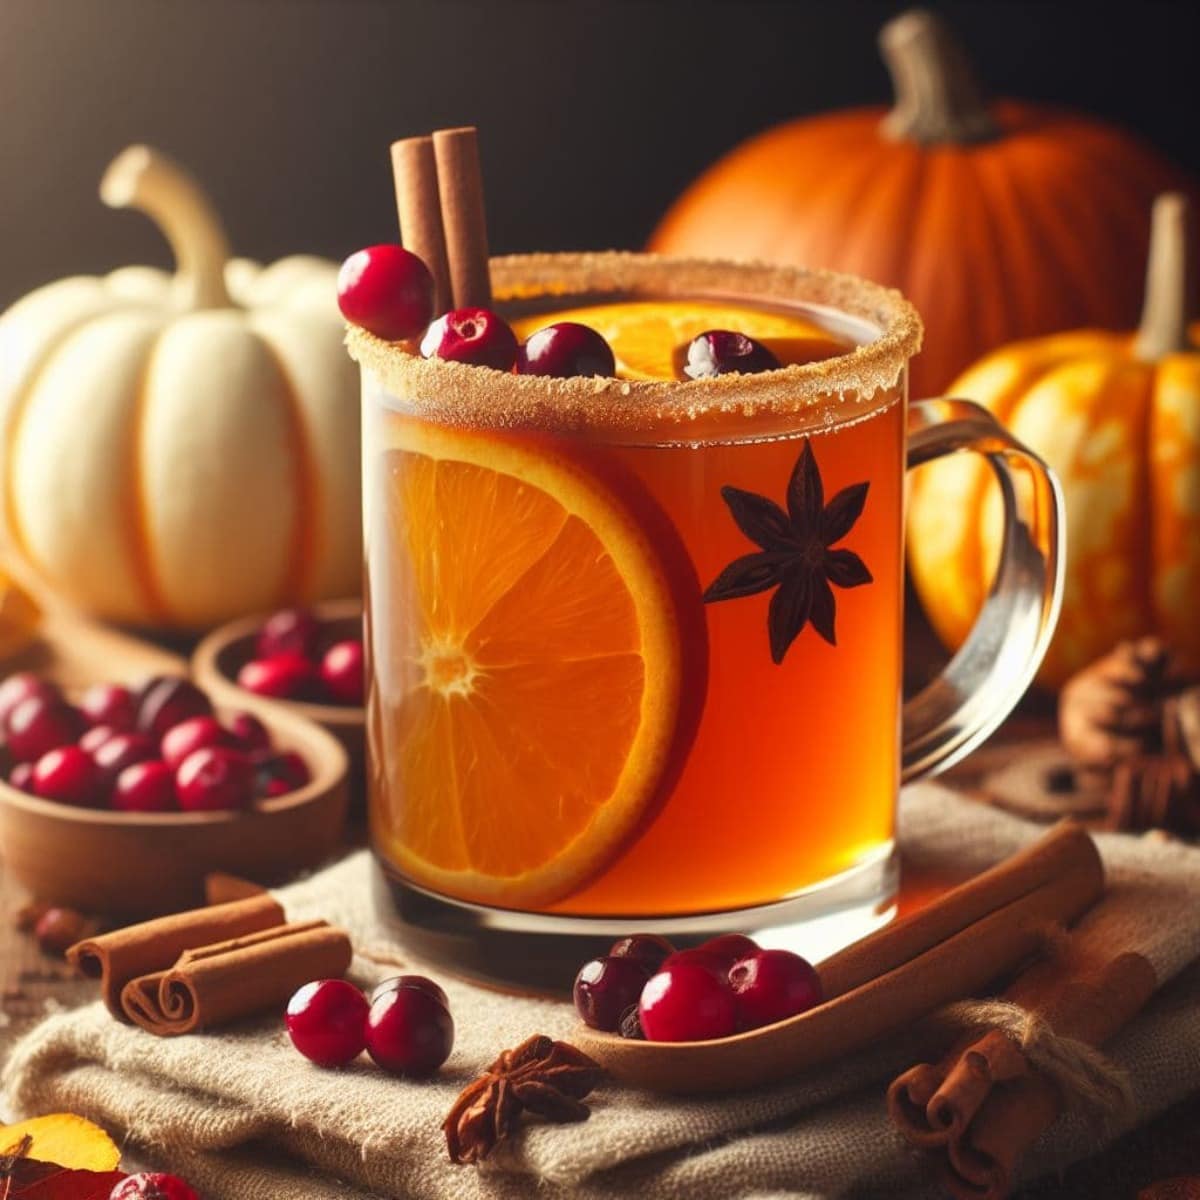 Glass of hot toddy with orange slices, cranberries and cinnamon sticks